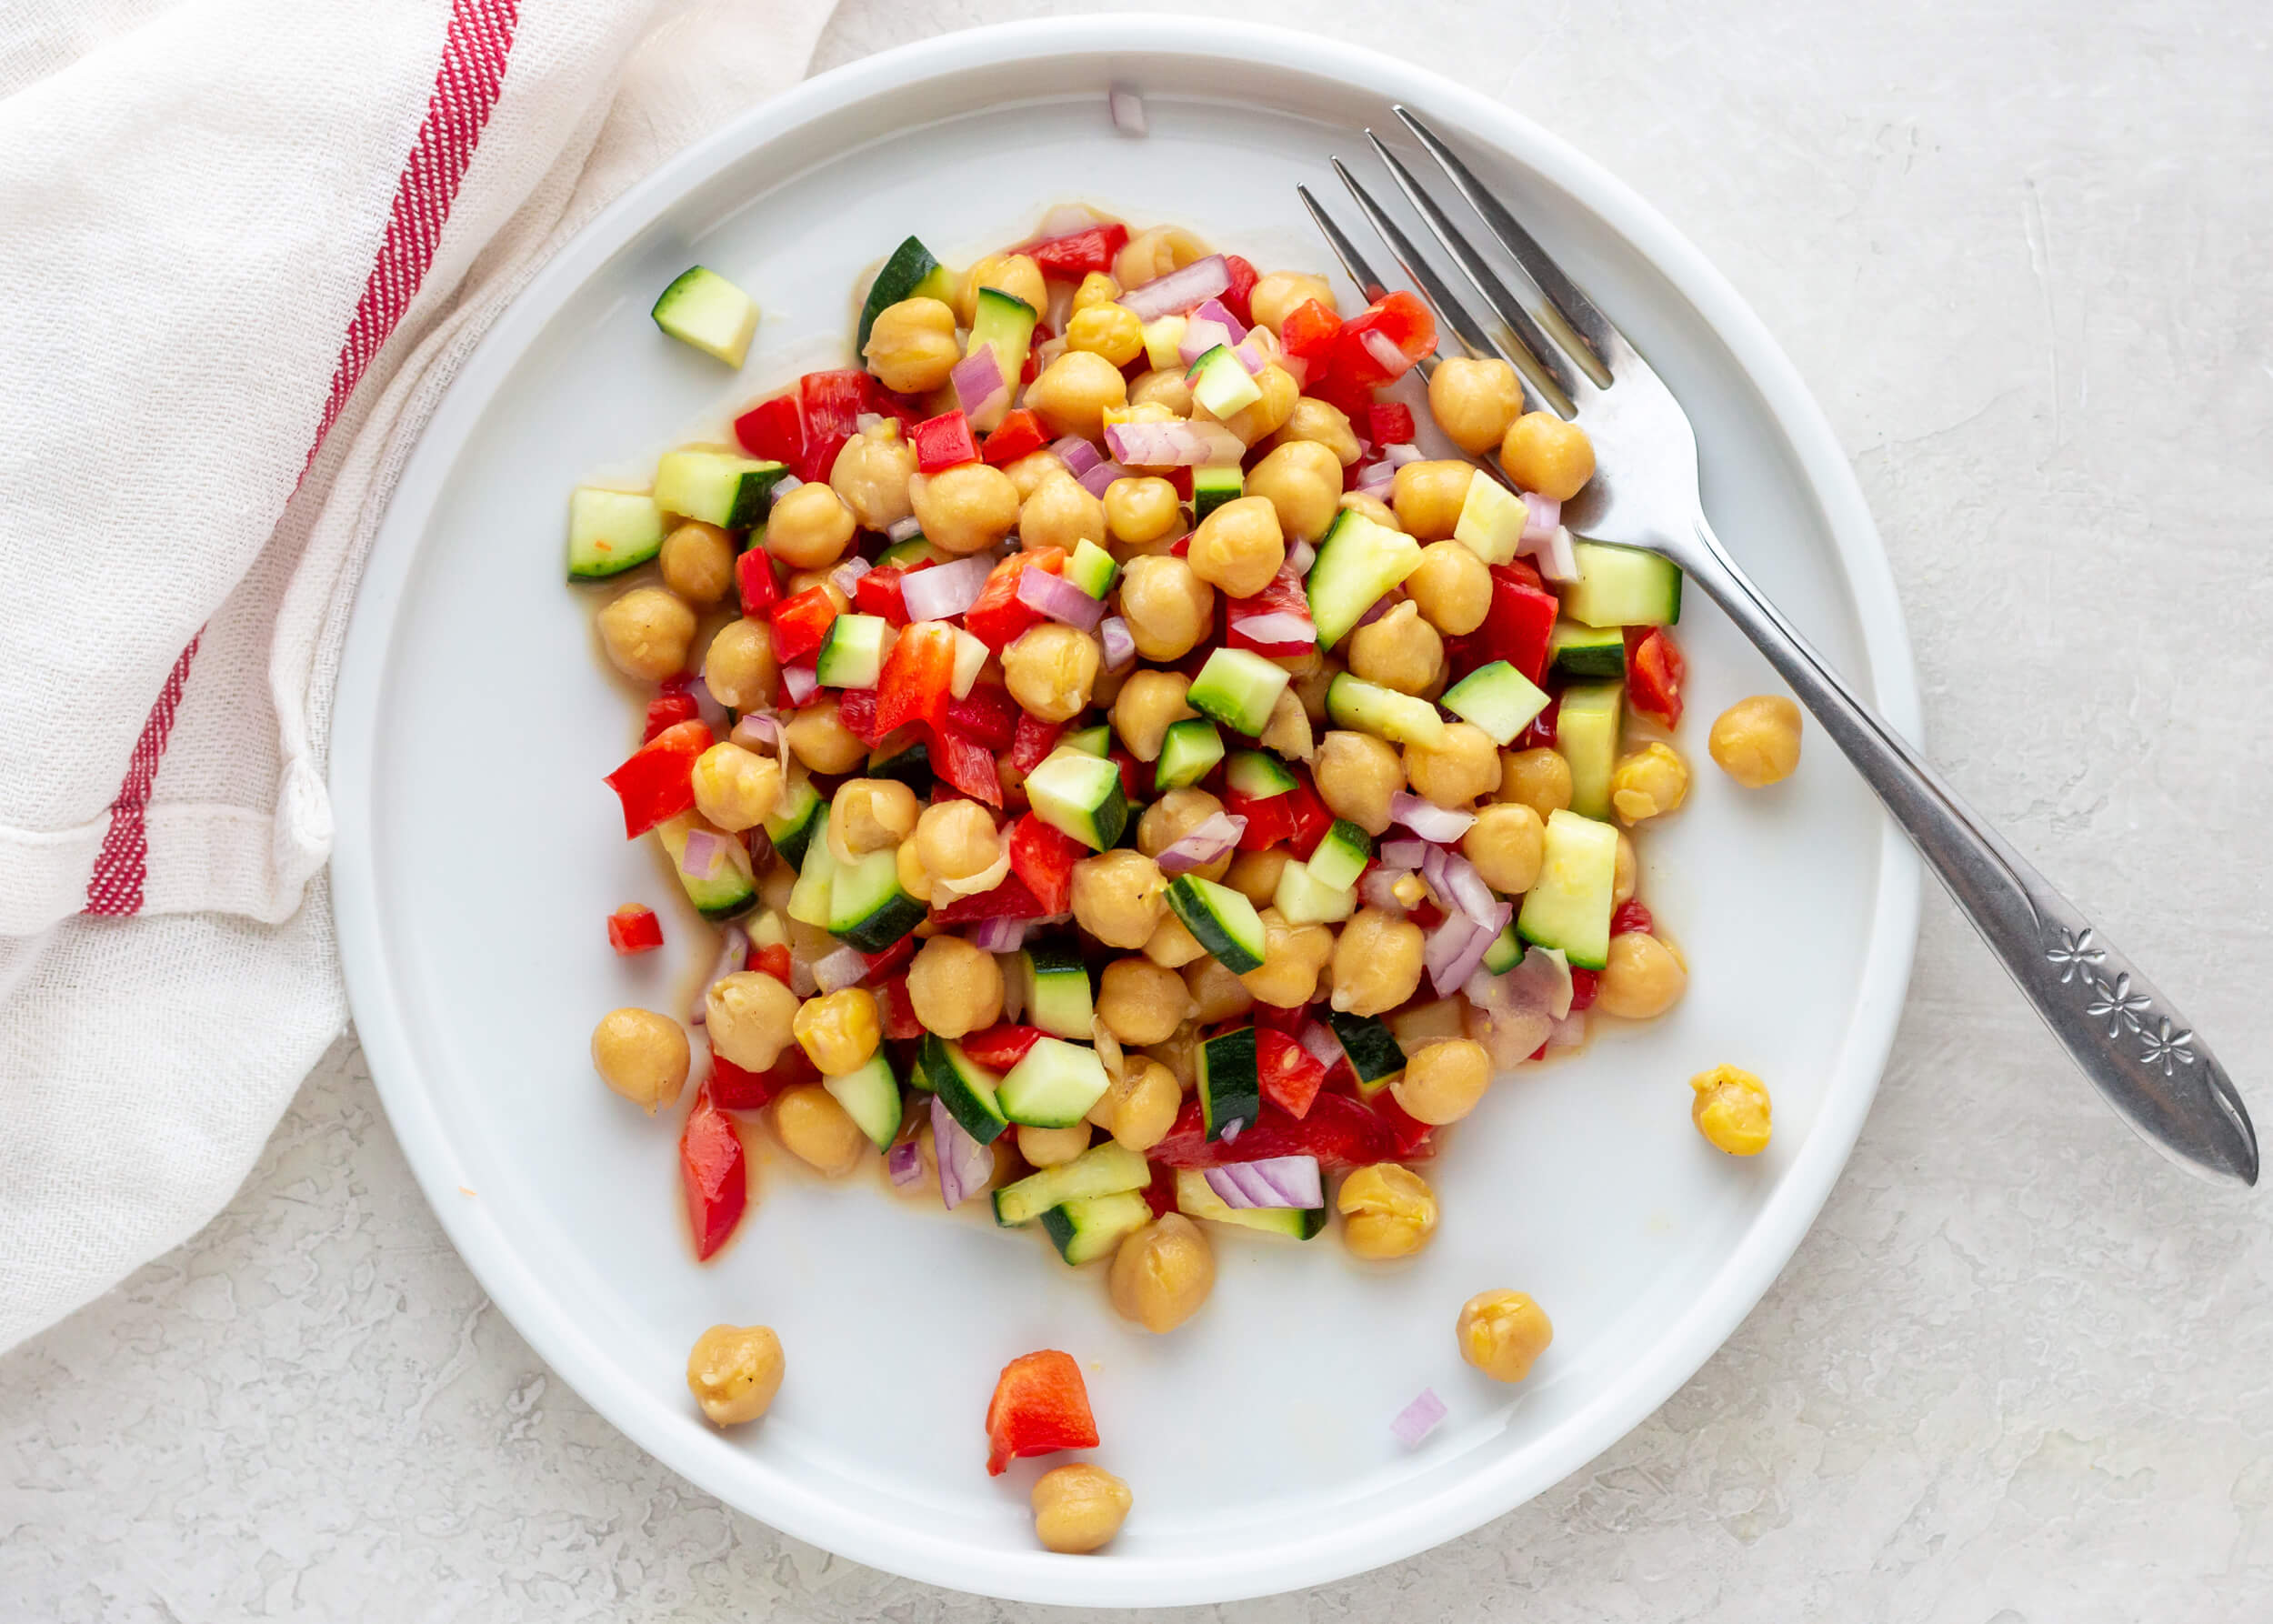 20 Healthy Meals to Help Your Clients Eat Healthy on a Tight Budget: Lemon Maple Chickpea Salad